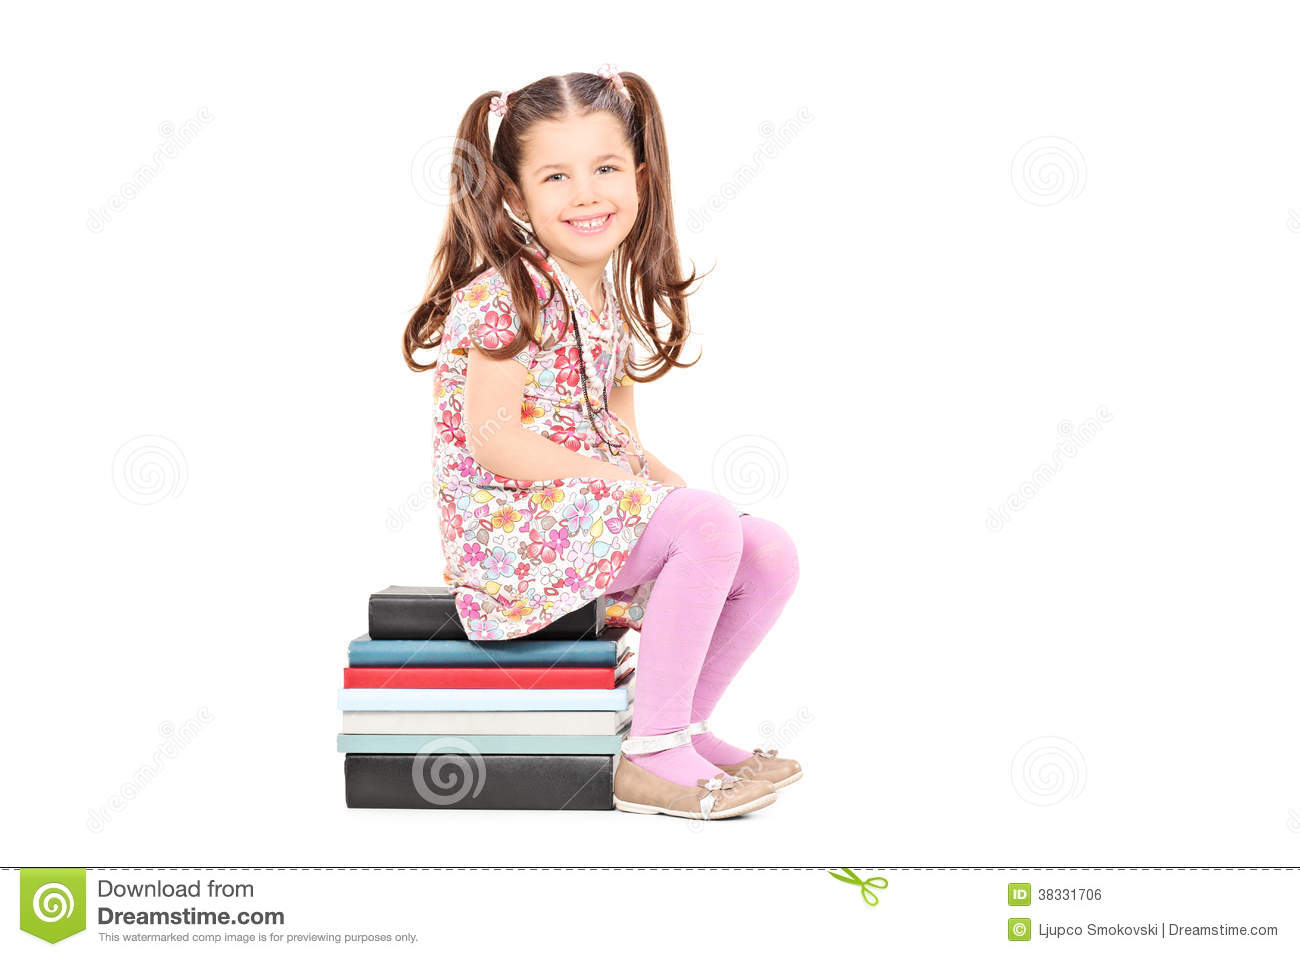 Shy Girl Sitting On A Stack Of Books Royalty Free Stock Image   Image